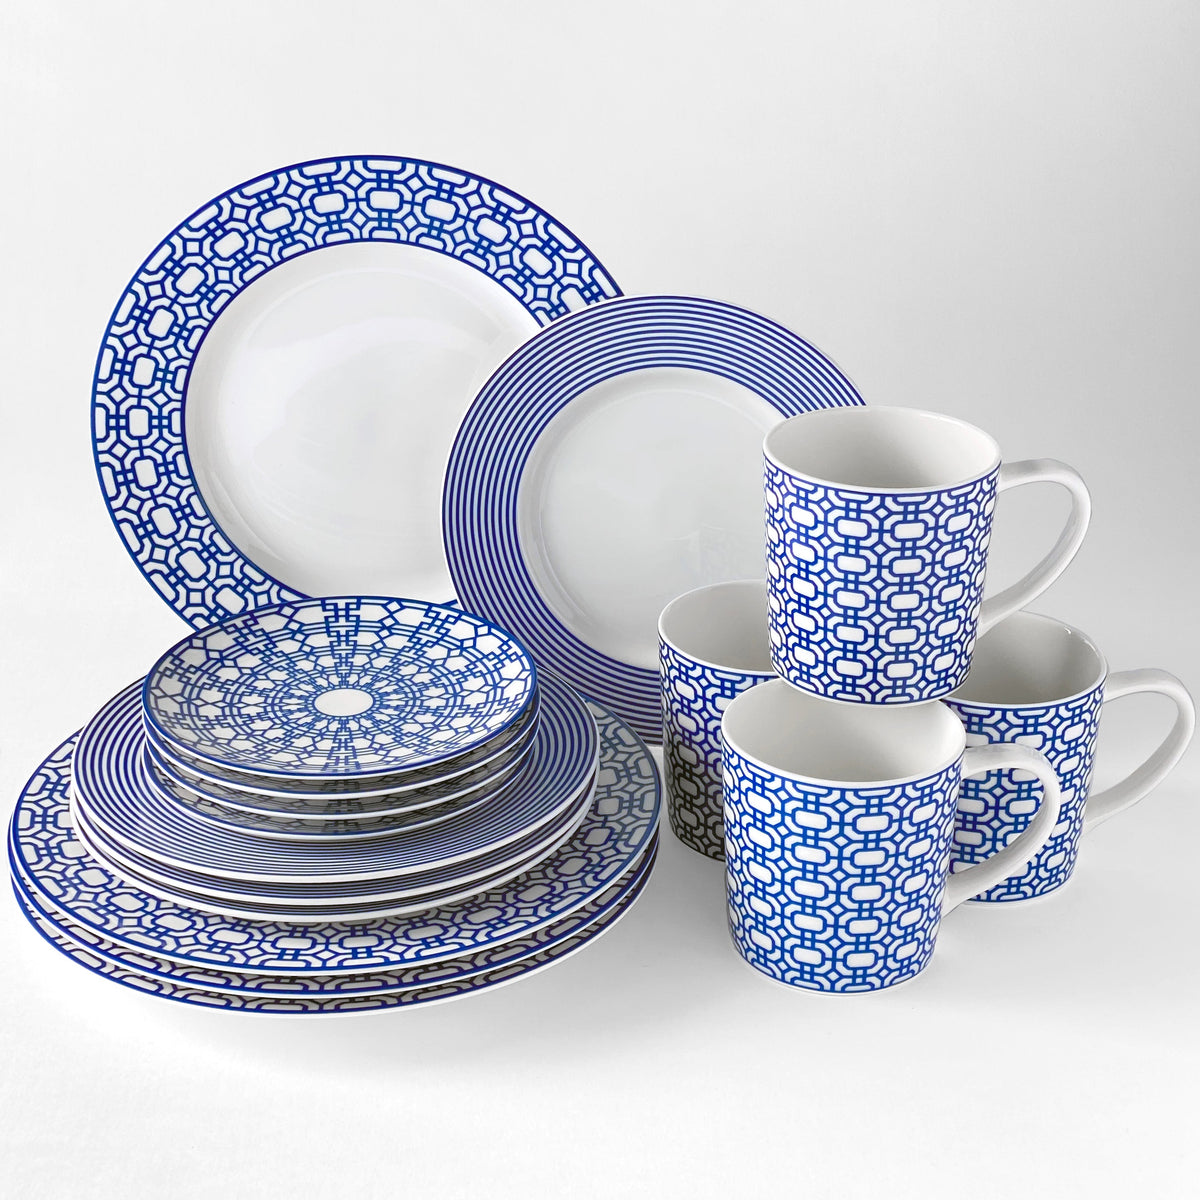 A Newport Stripe Rimmed Salad Plate by Caskata Artisanal Home features blue and white high-fired porcelain with various geometric patterns arranged against a white background. The Newport Stripe design adds a sophisticated touch to the collection.